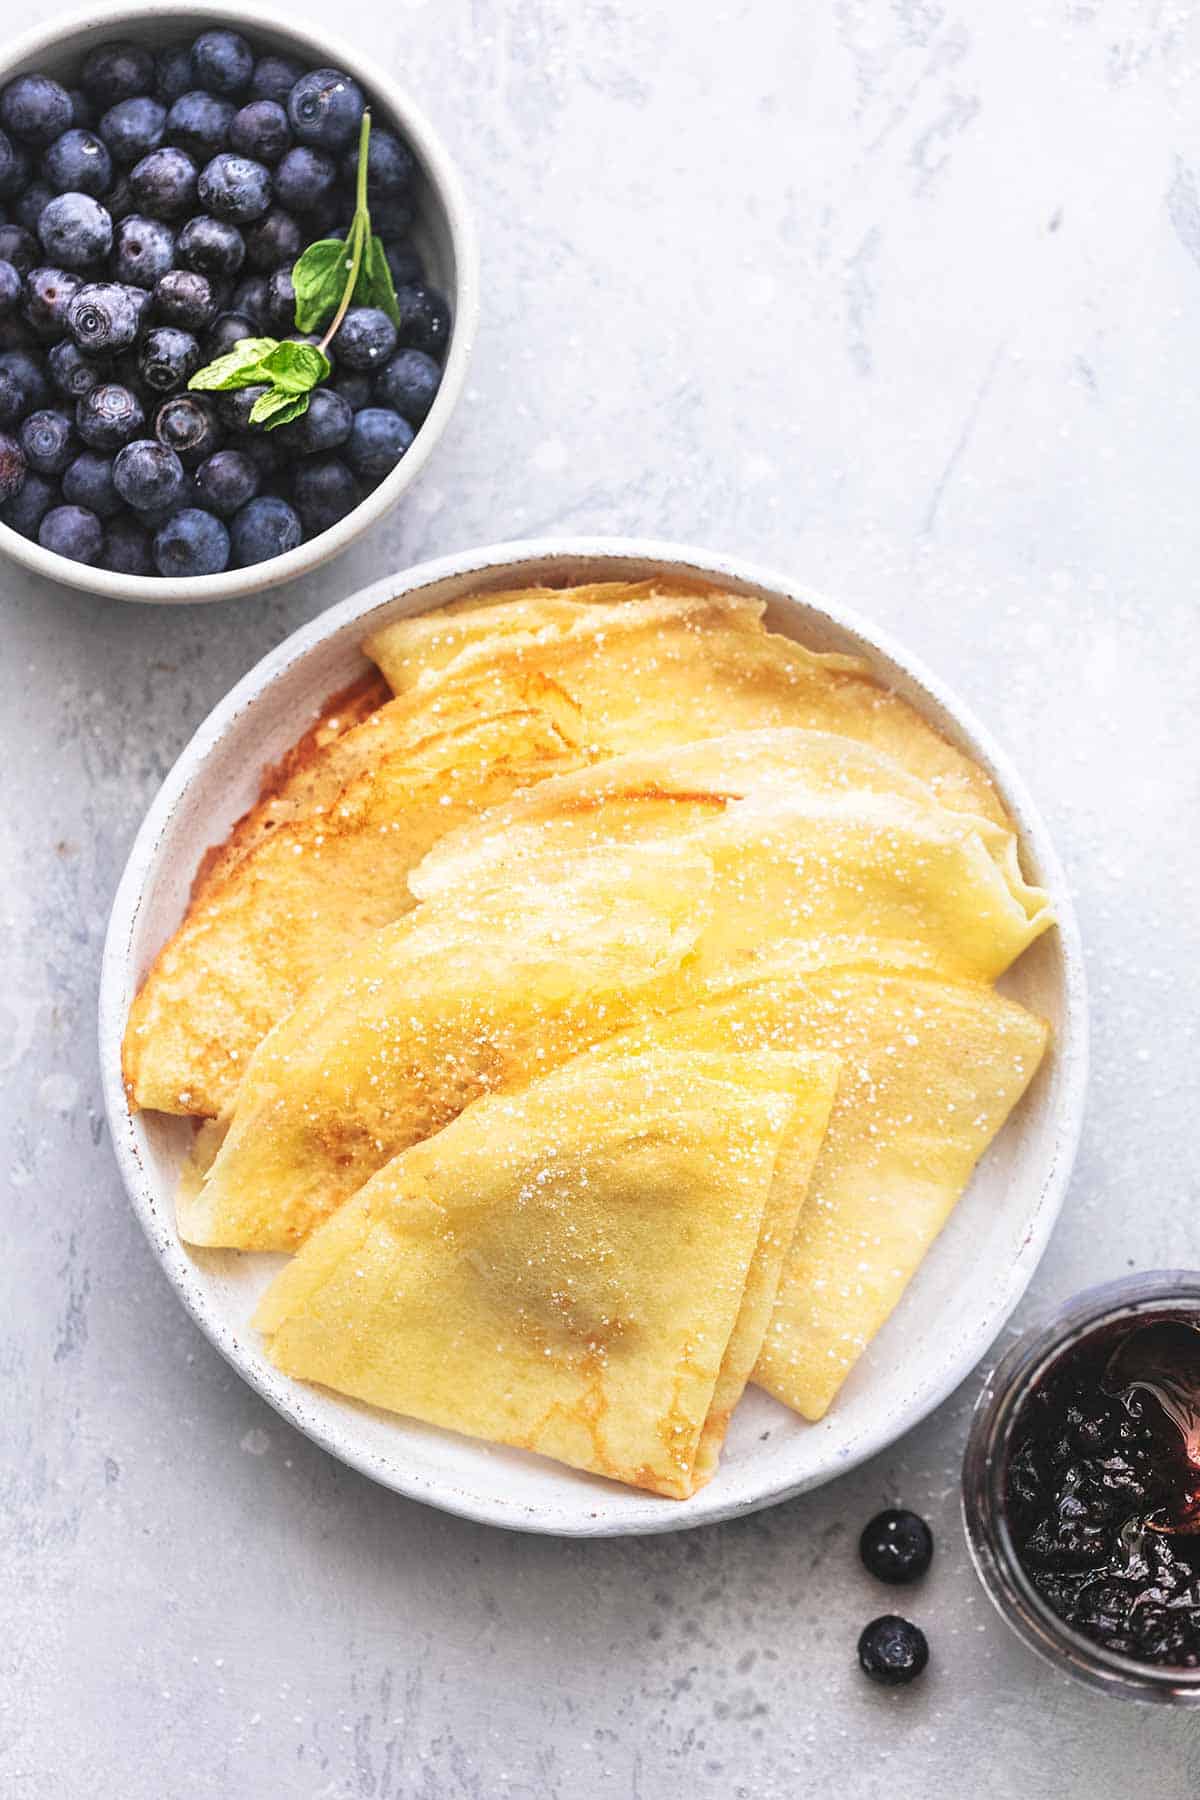 top view of crepes on a plate with blueberries on the side in a bowl.